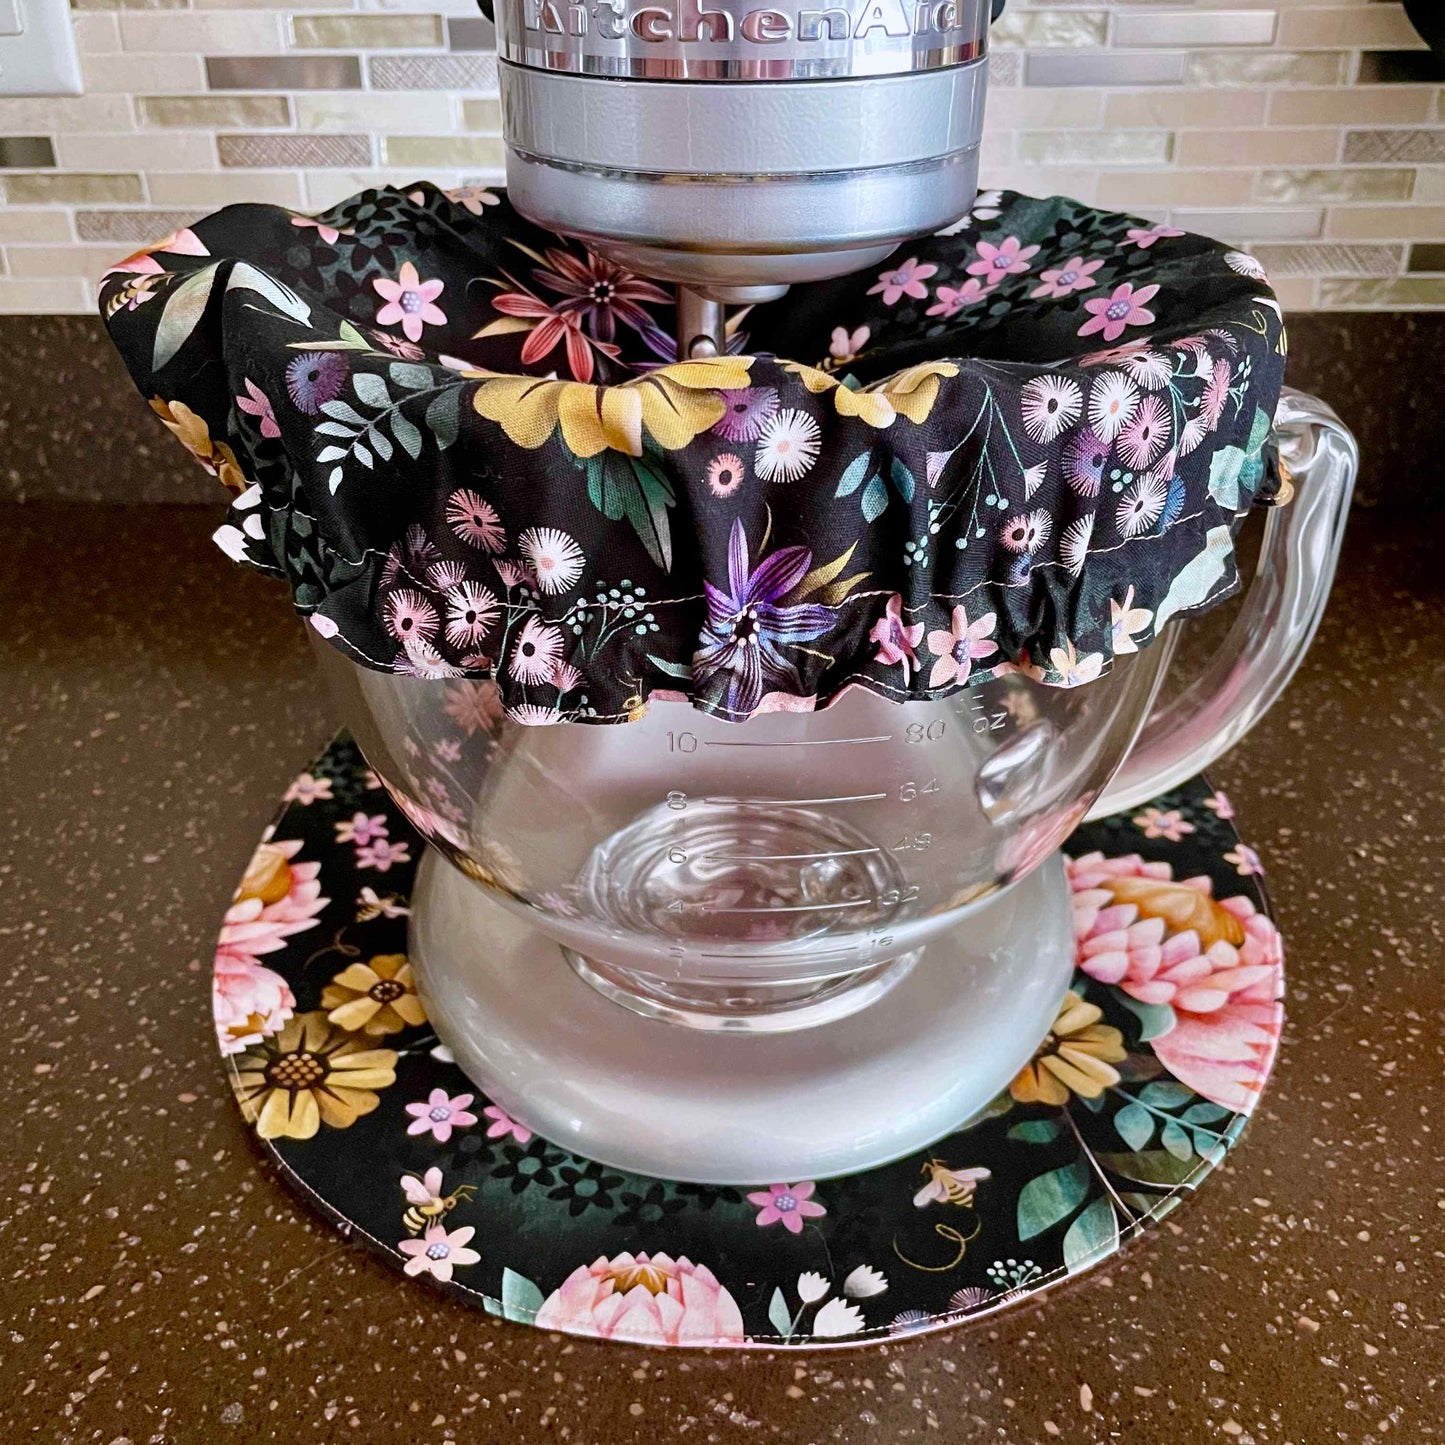 Stand Mixer Bowl Covers -  Honeybloom Bees and Flowers Bowl Cover